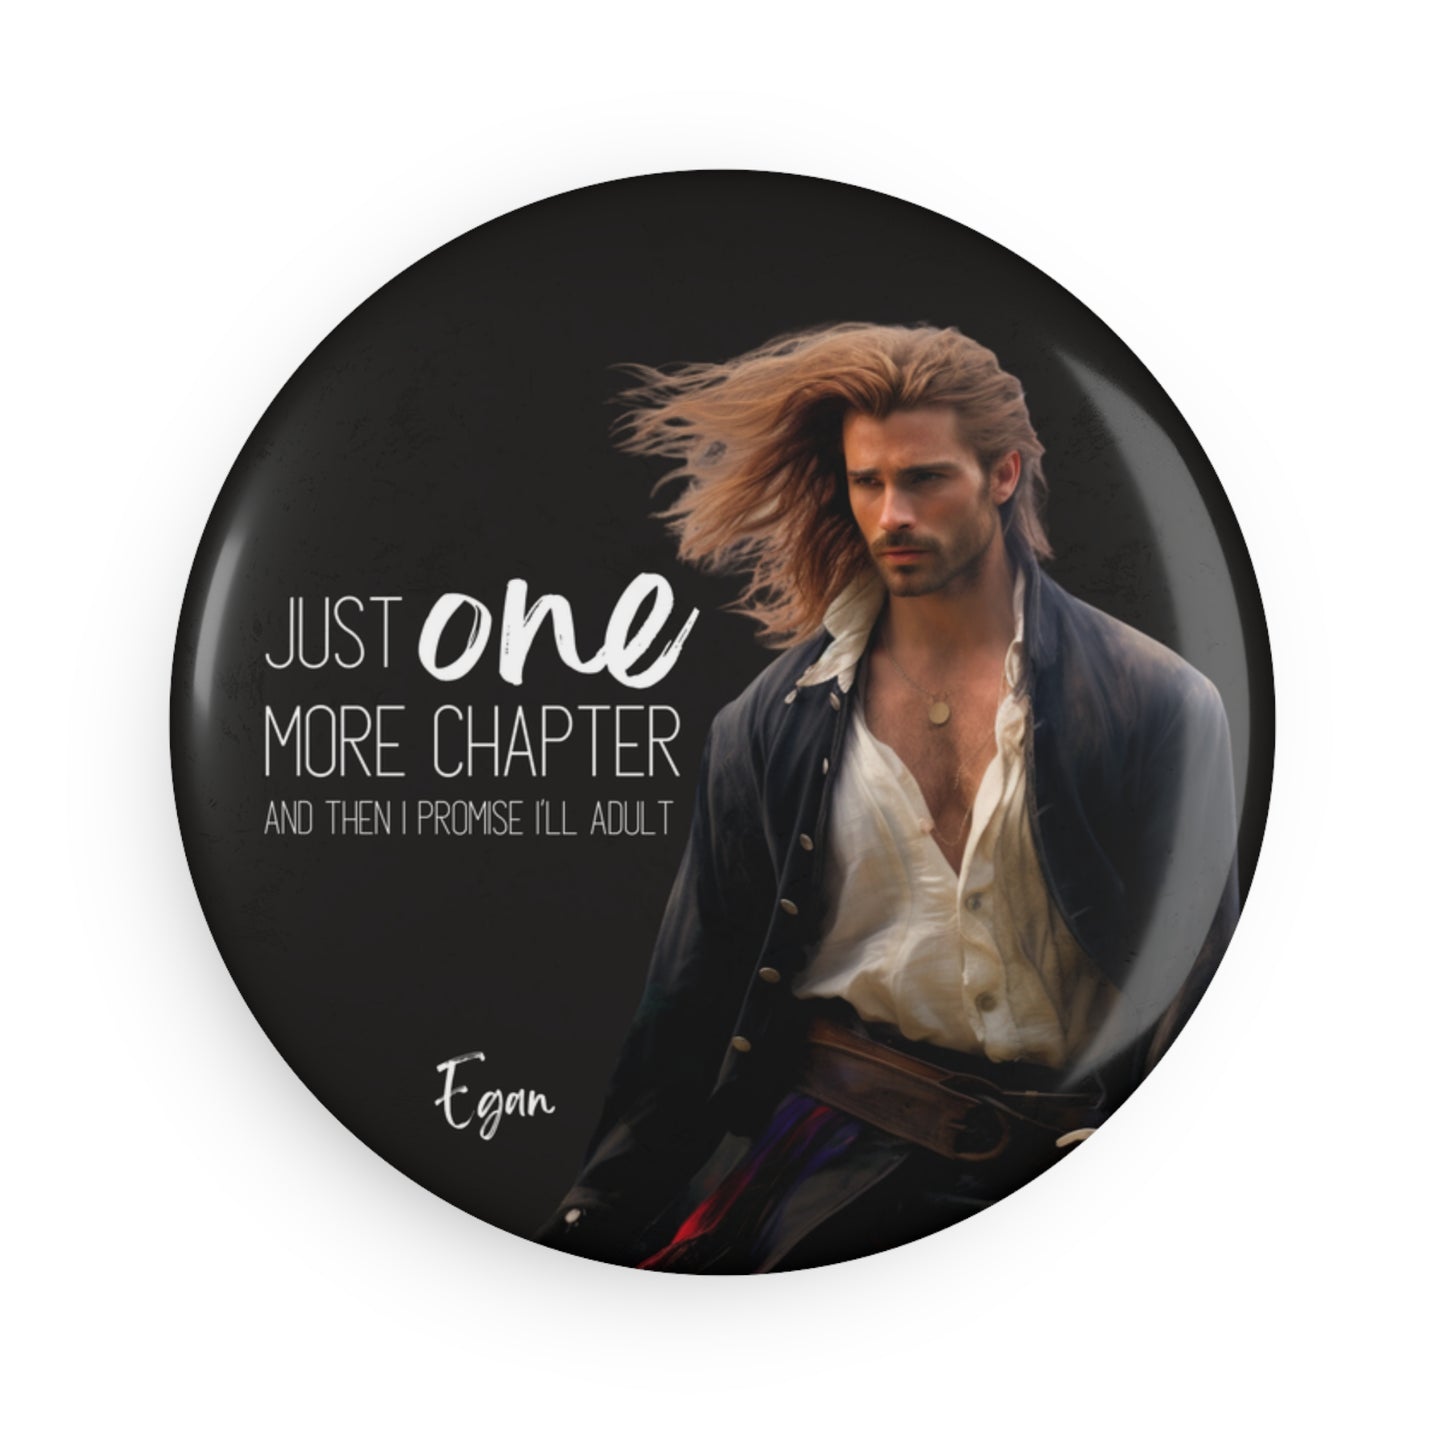 Button Magnet, Round (1 & 10 pcs).Just one more chapter with Egan